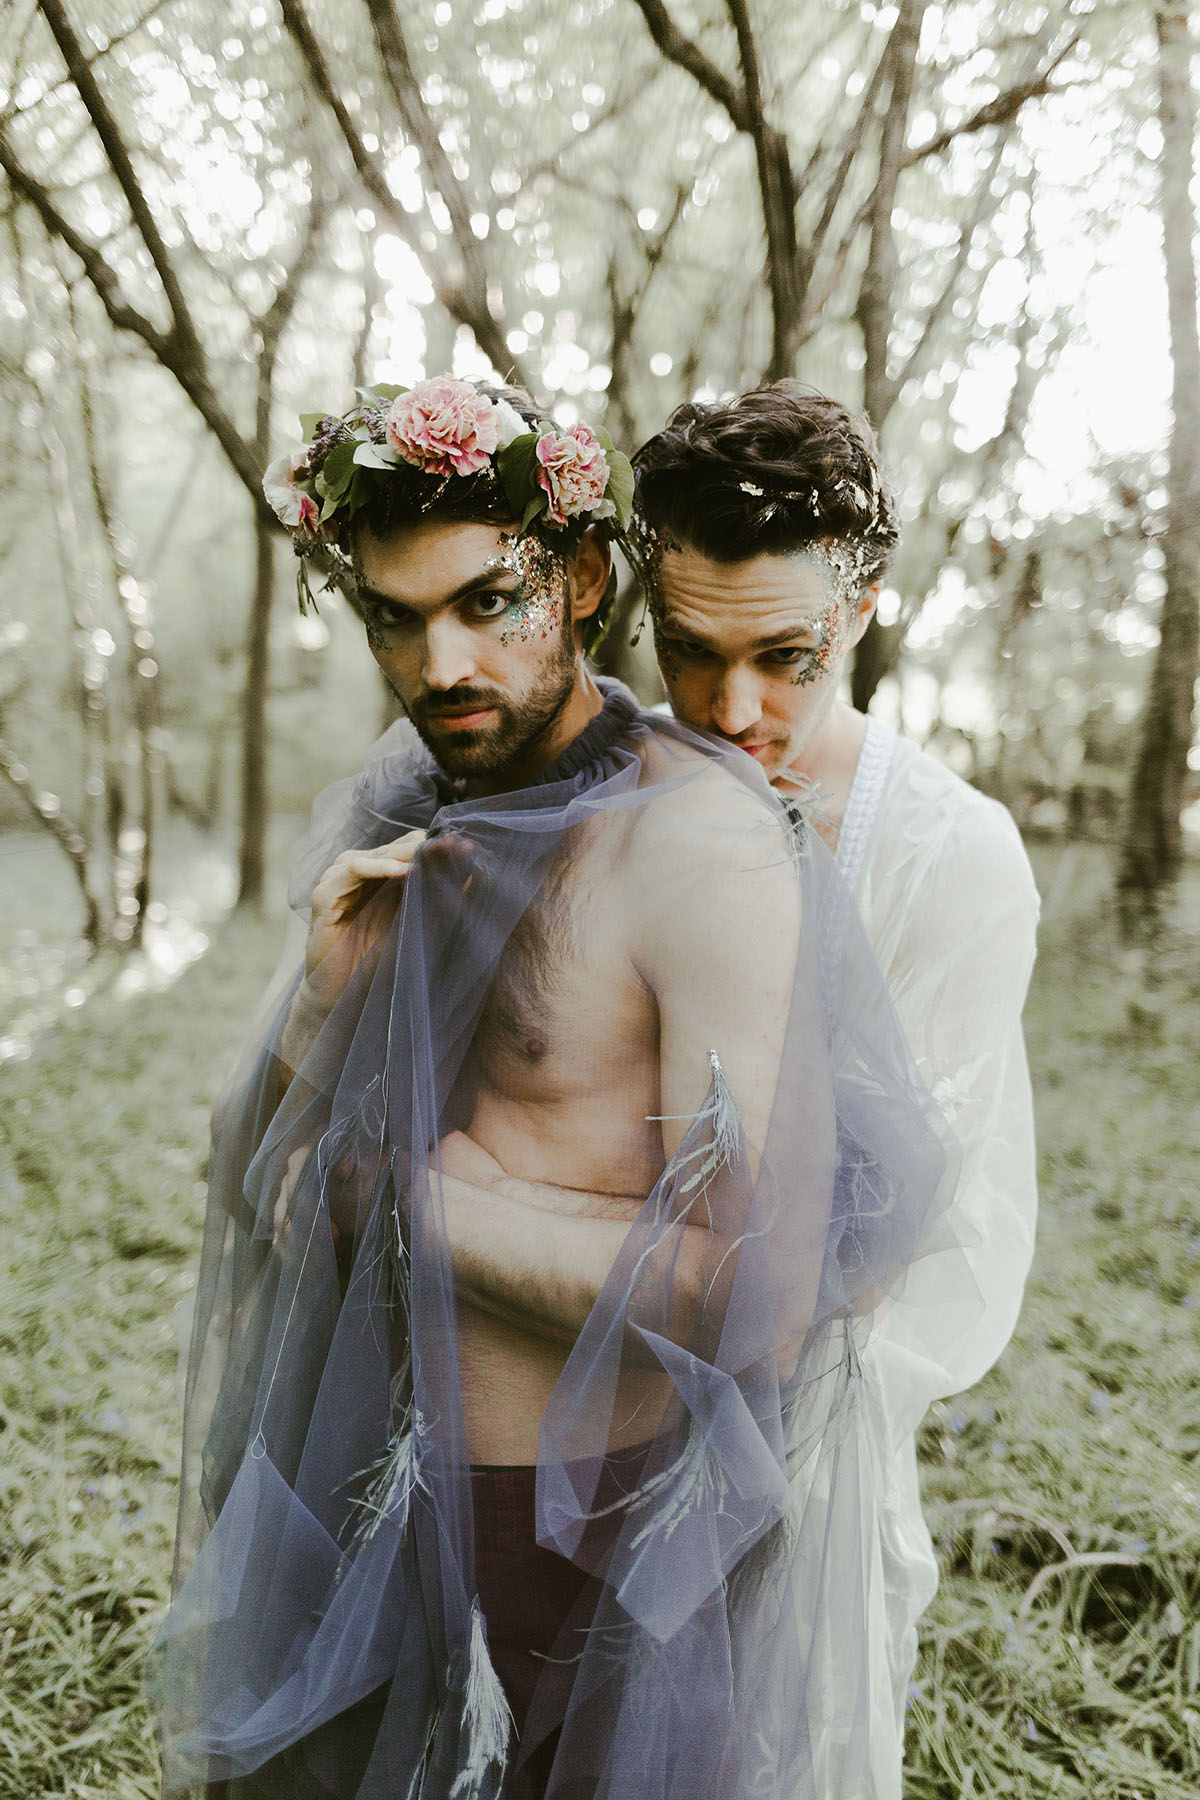 Creative wildflower elopement inspiration in the woods two grooms flowers floral veil suits creative unique styled shoot